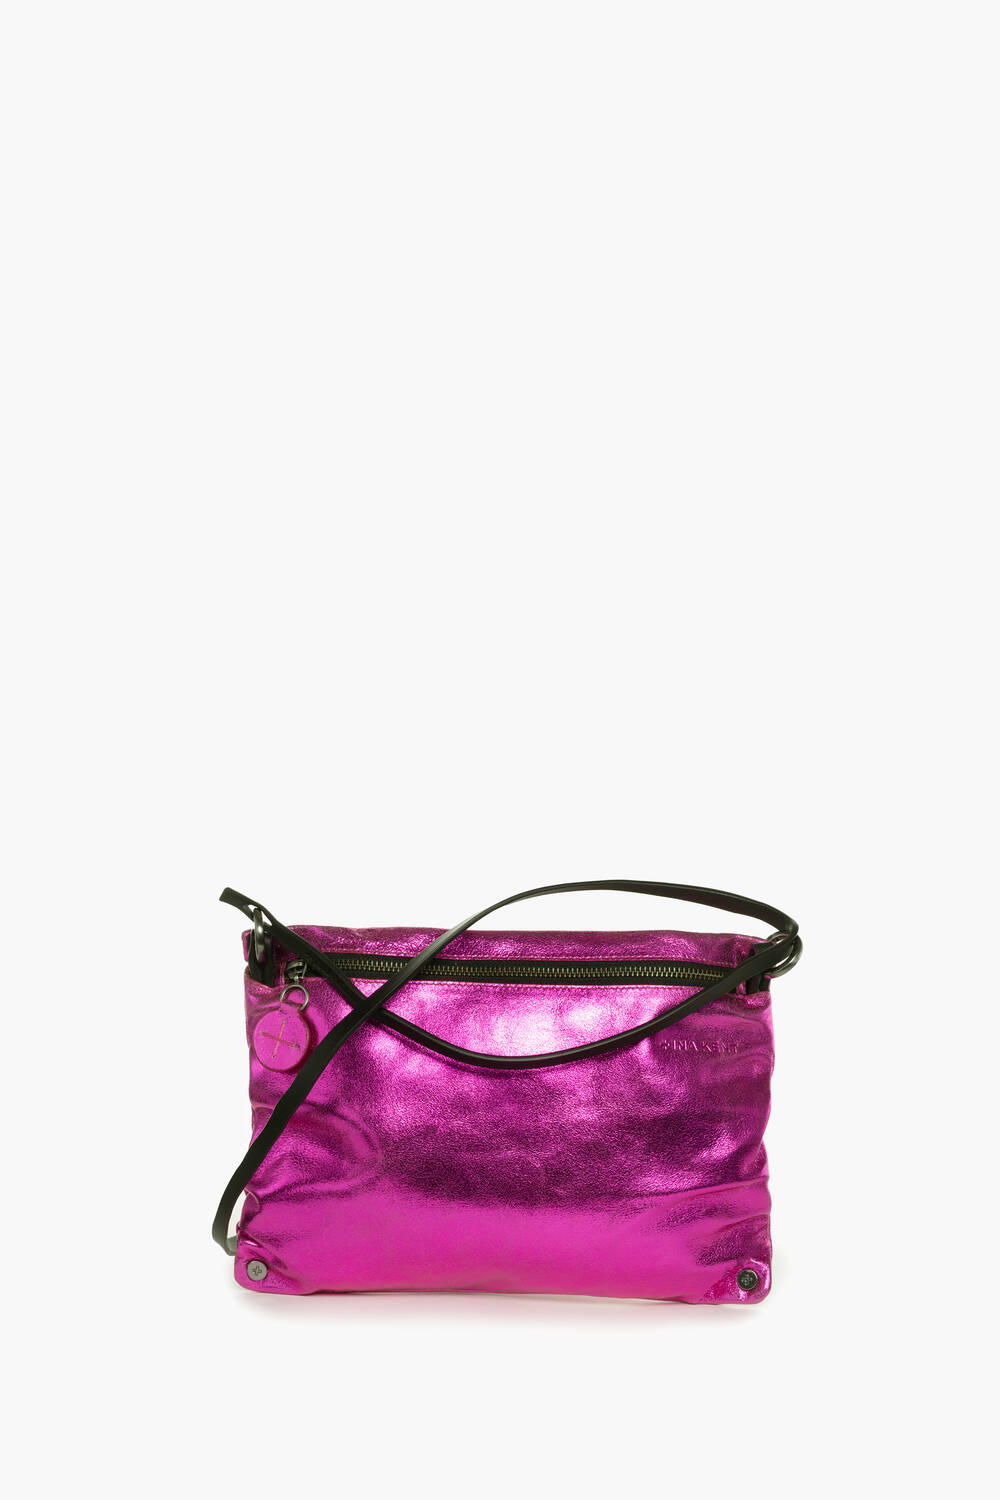 INA KENT Schultertasche MOONLIT Special Edition neon pink